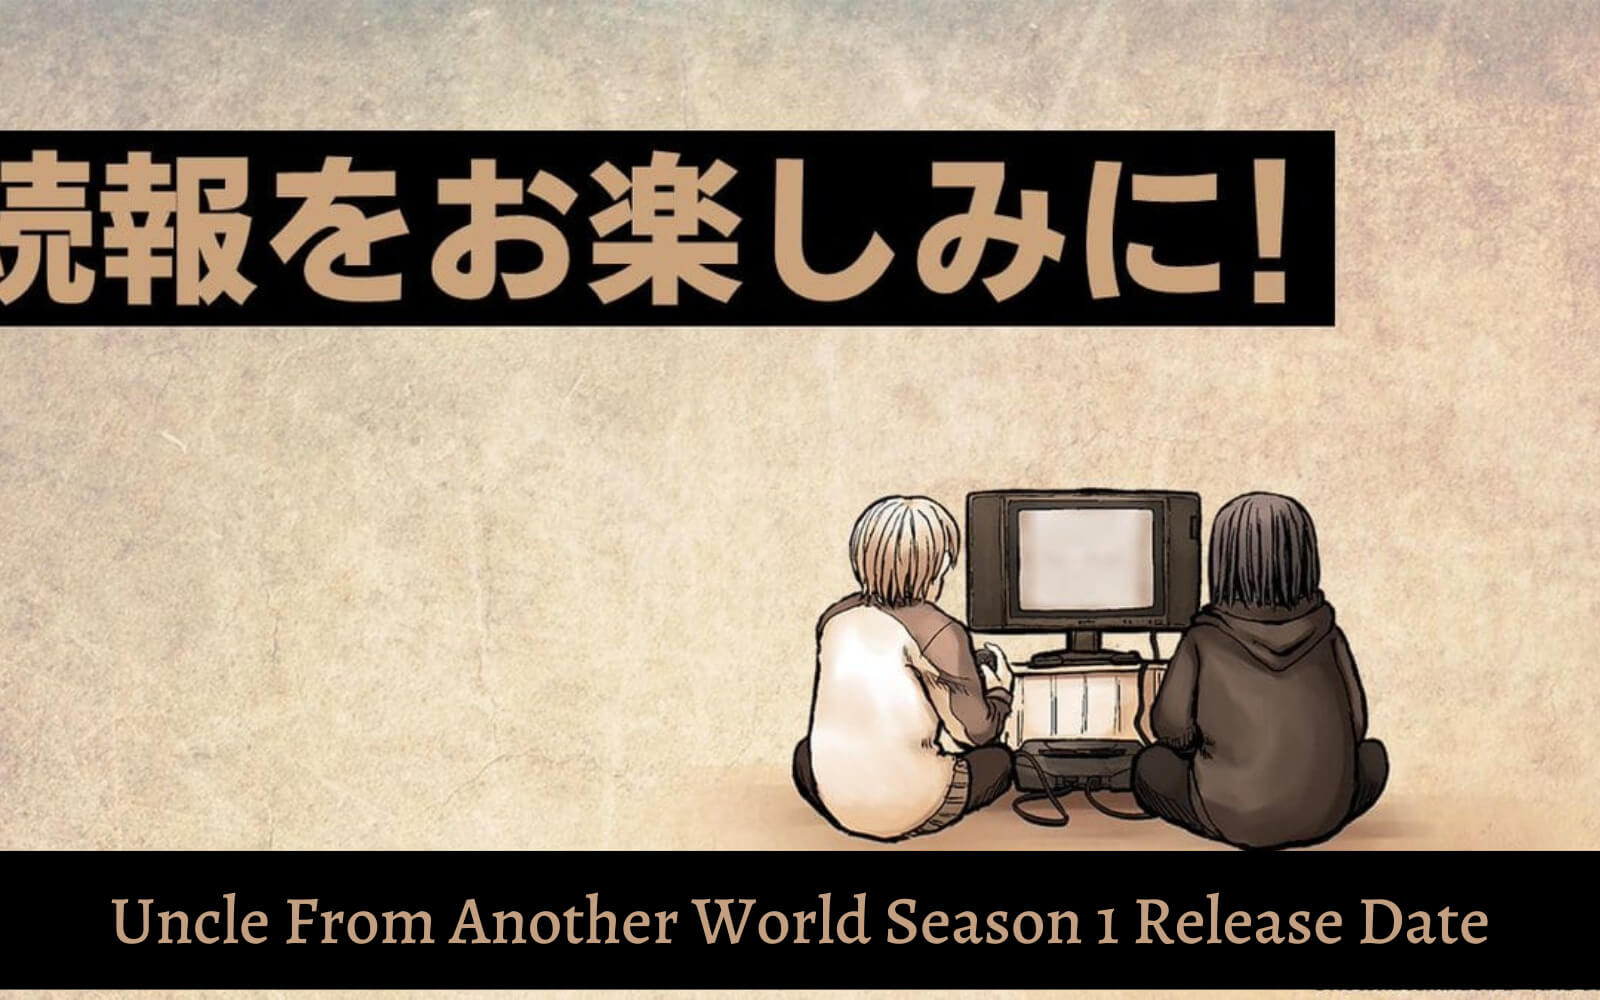 Uncle From Another World Season 1 Release Date